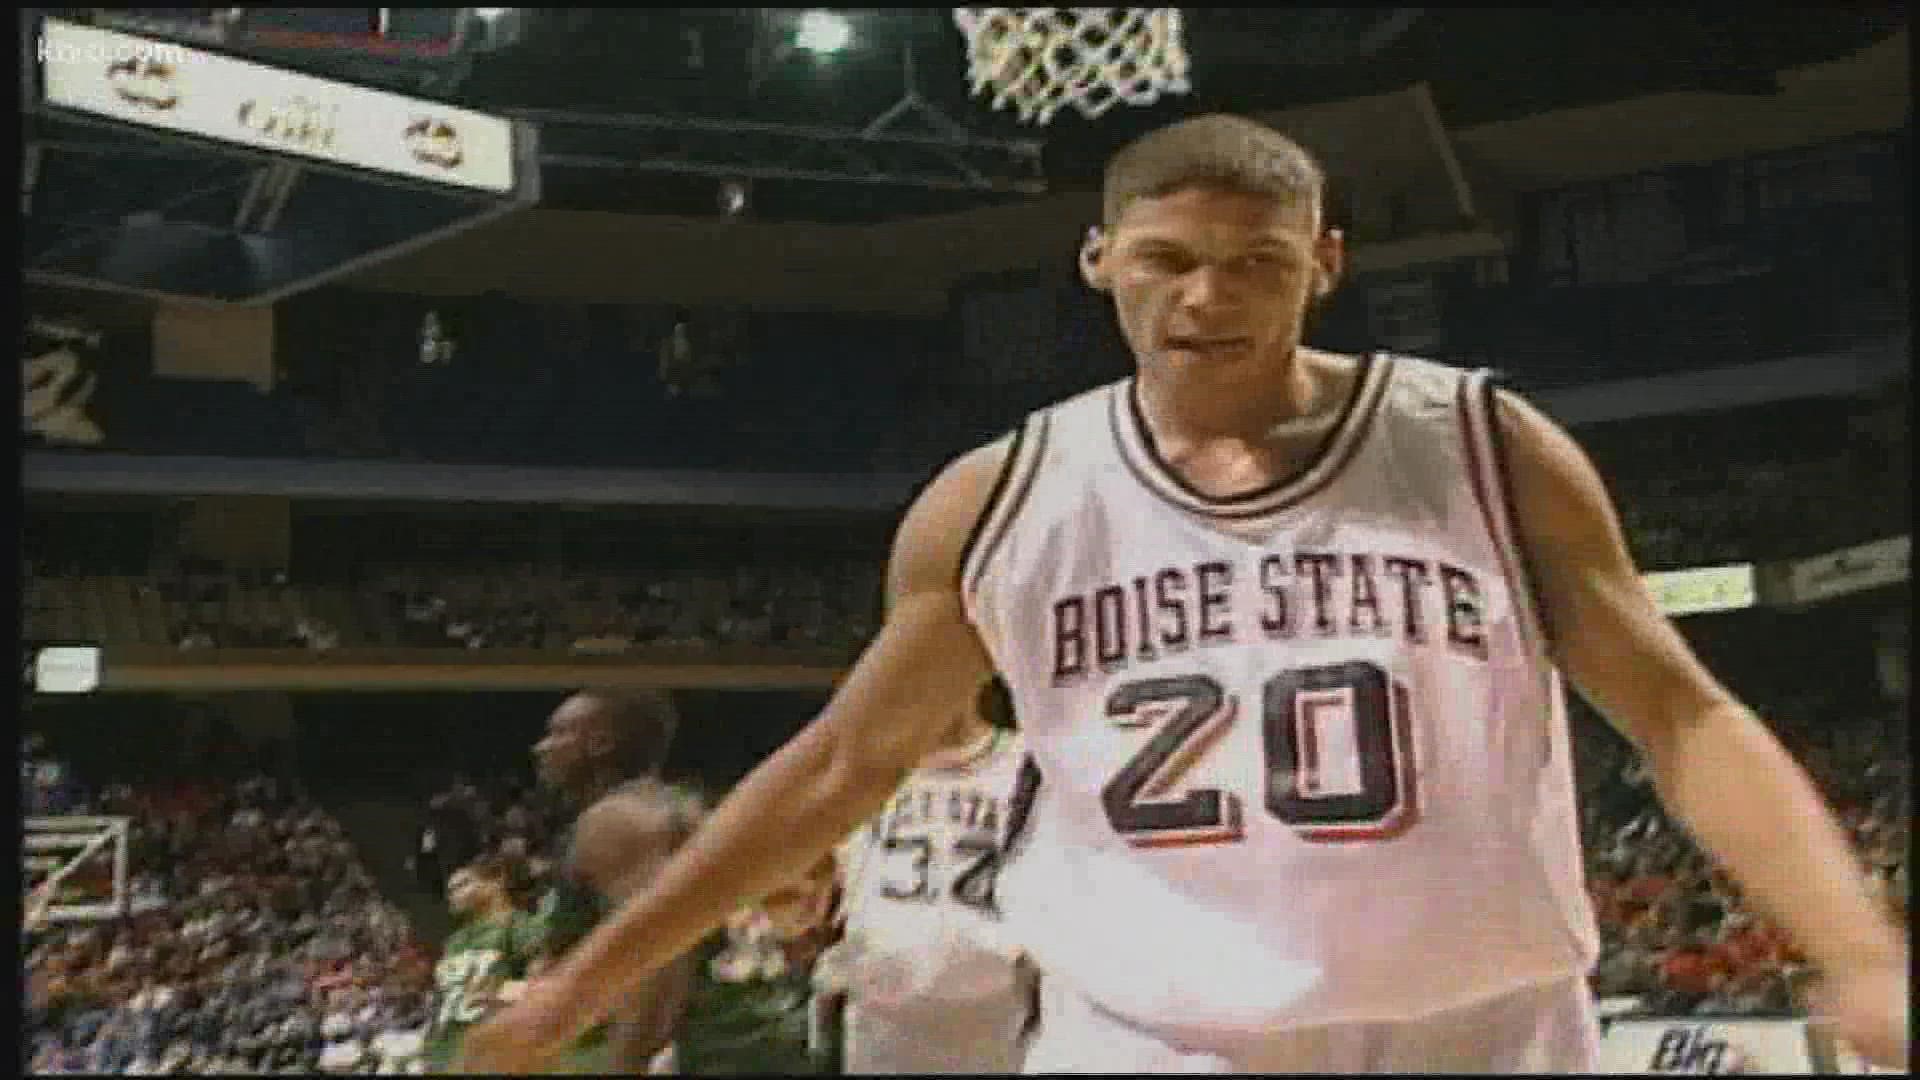 On Monday, Boise State announced the 1999 Big West Player of the Year is returning home to join Leon Rice and the Broncos' men's basketball coaching staff.